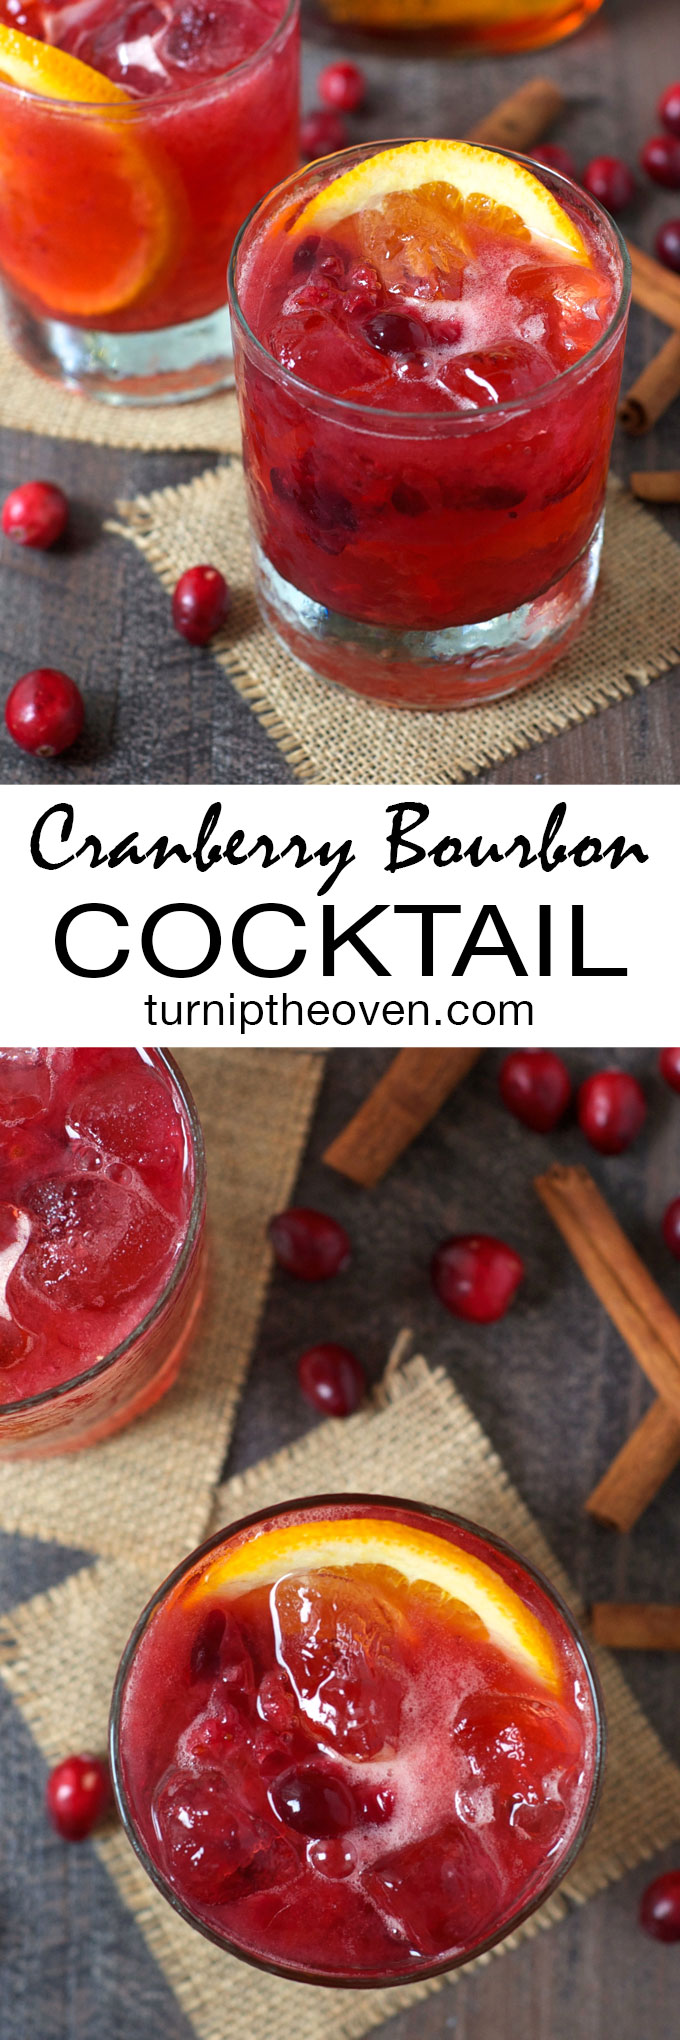 This festive, fizzy cranberry bourbon cocktail is made with only three simple ingredients!